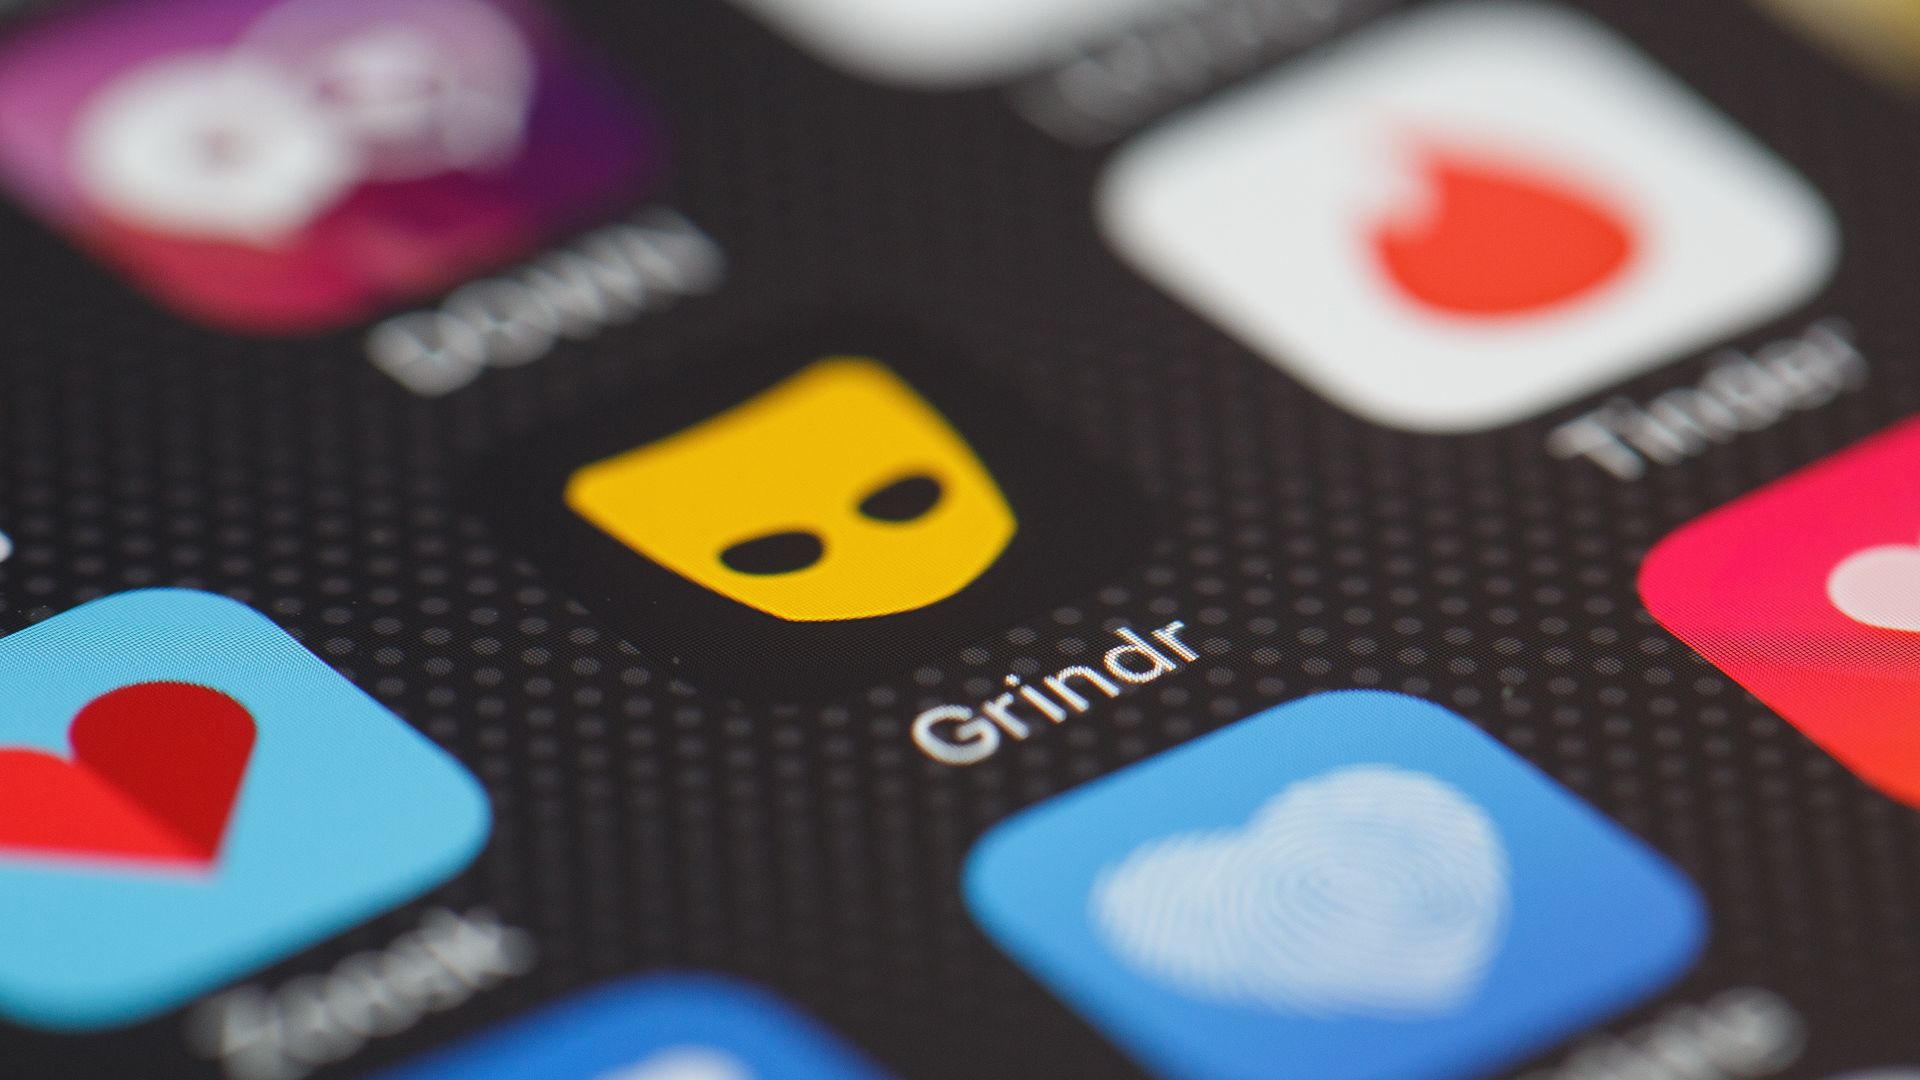  The 'Grindr' app logo is seen amongst other dating apps on a mobile phone screen.